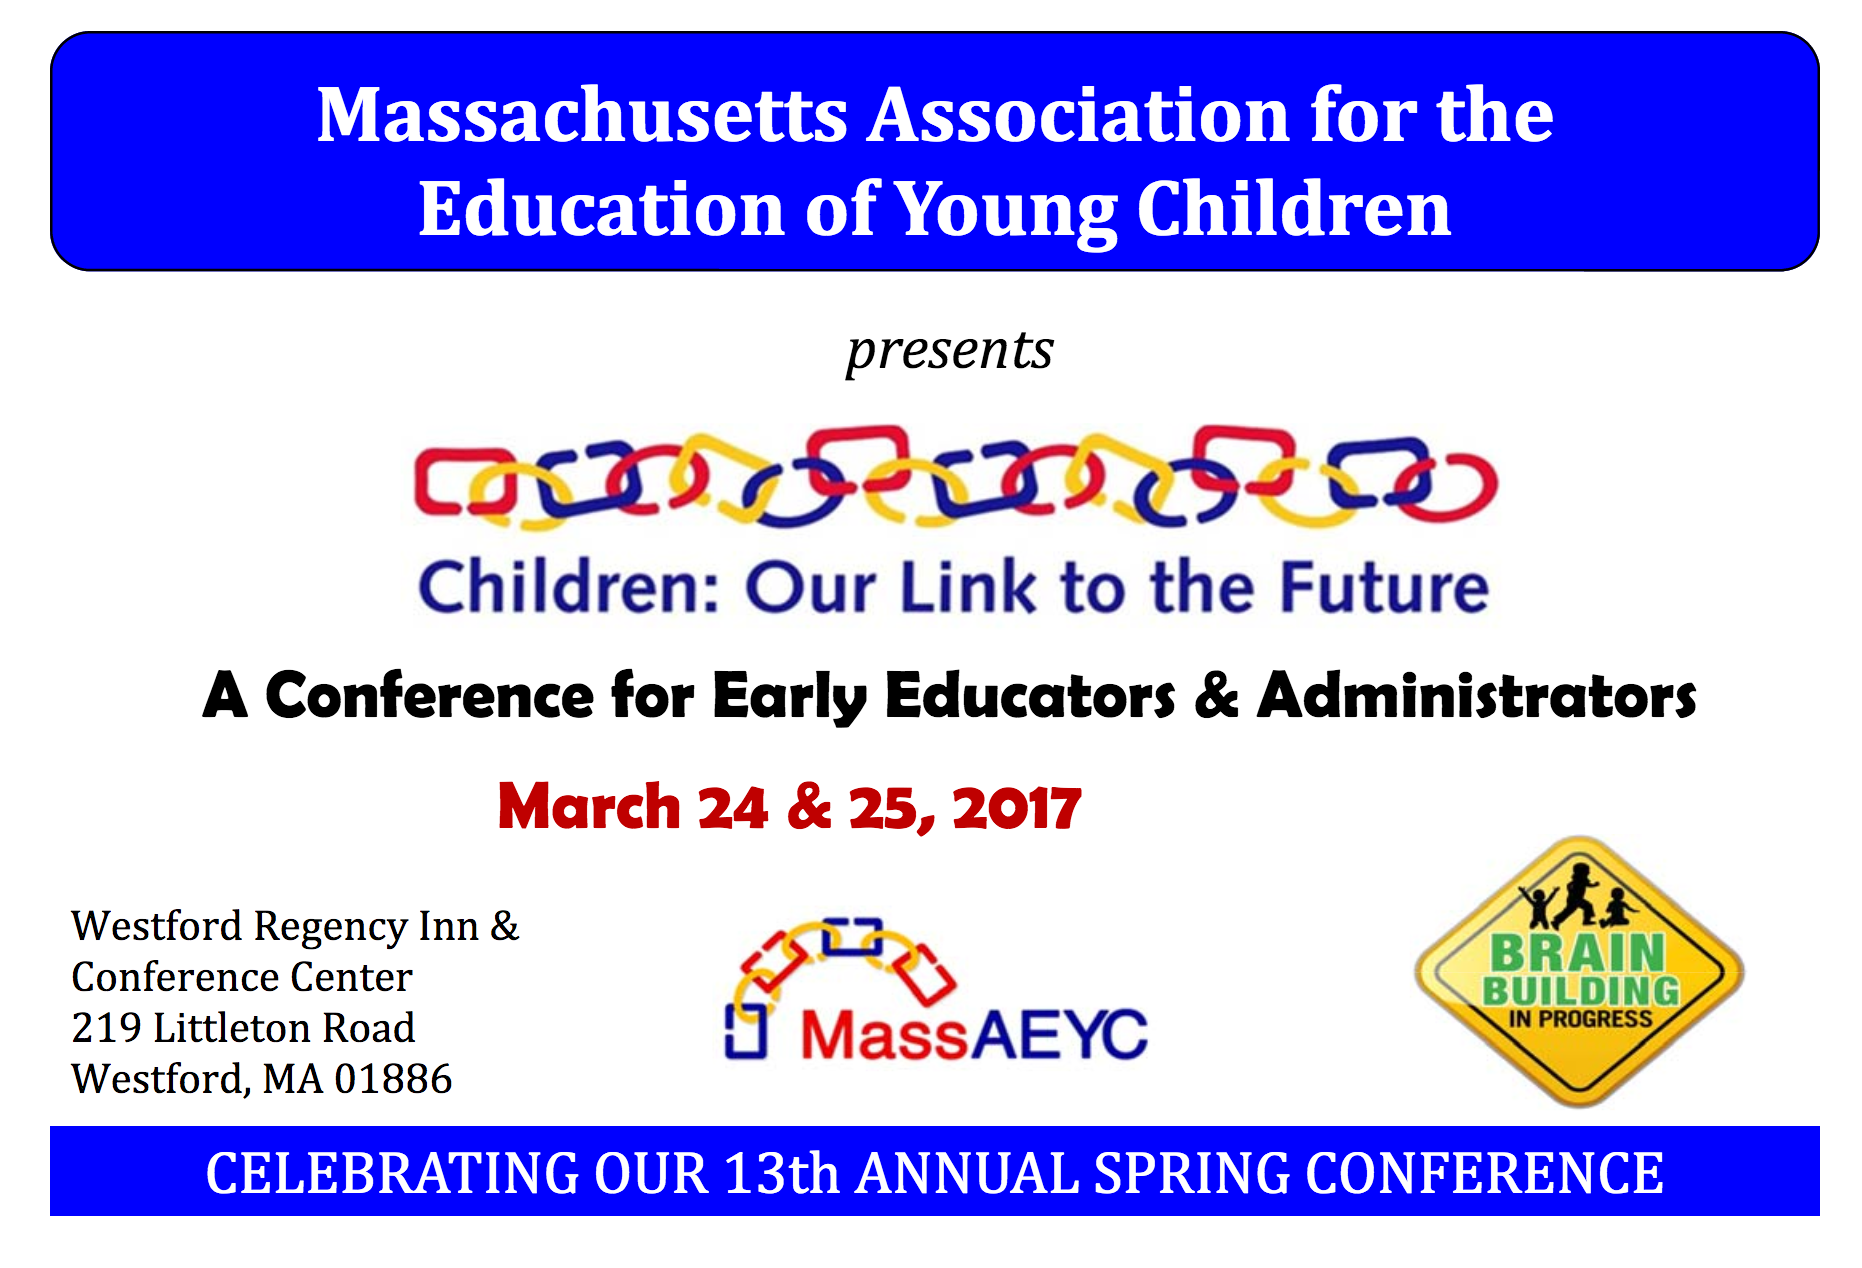 TERC at the MassAEYC Annual Spring Conference